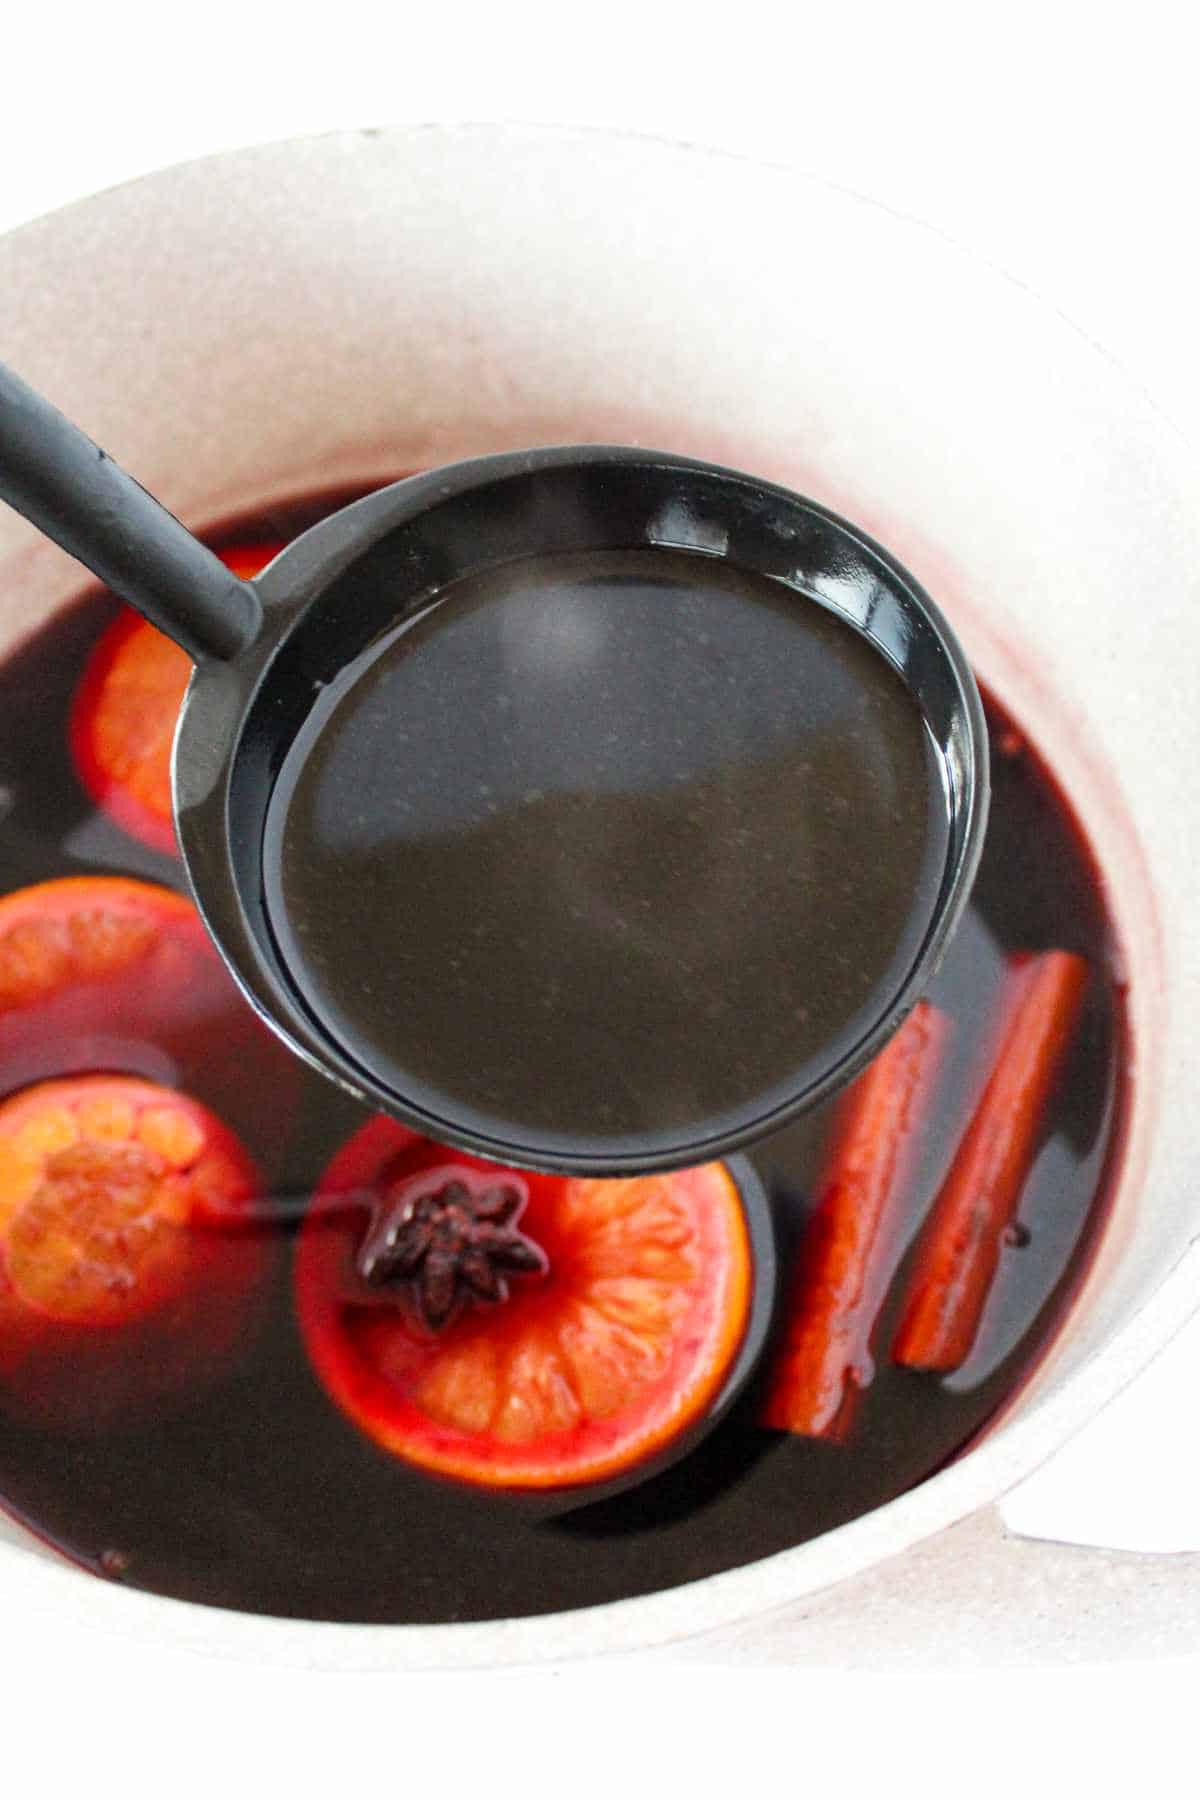 Pot of mulled wine with slices of orange, cinnamon sticks, and star anise.